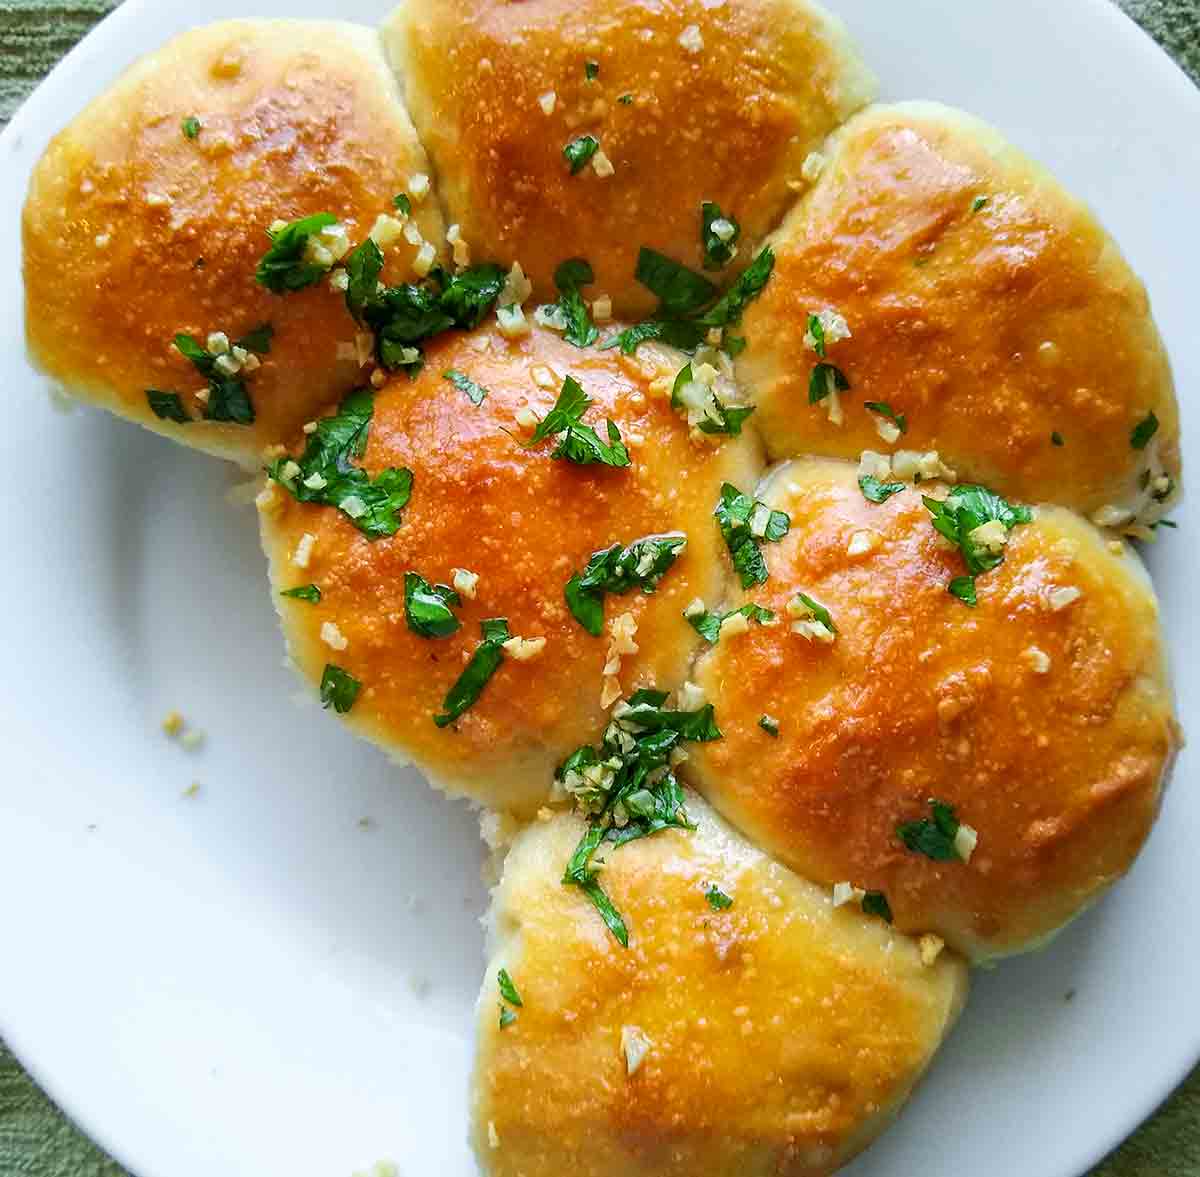 A round plate with Ukrainian garlic bread rolls, topped with garlic-parsley oil